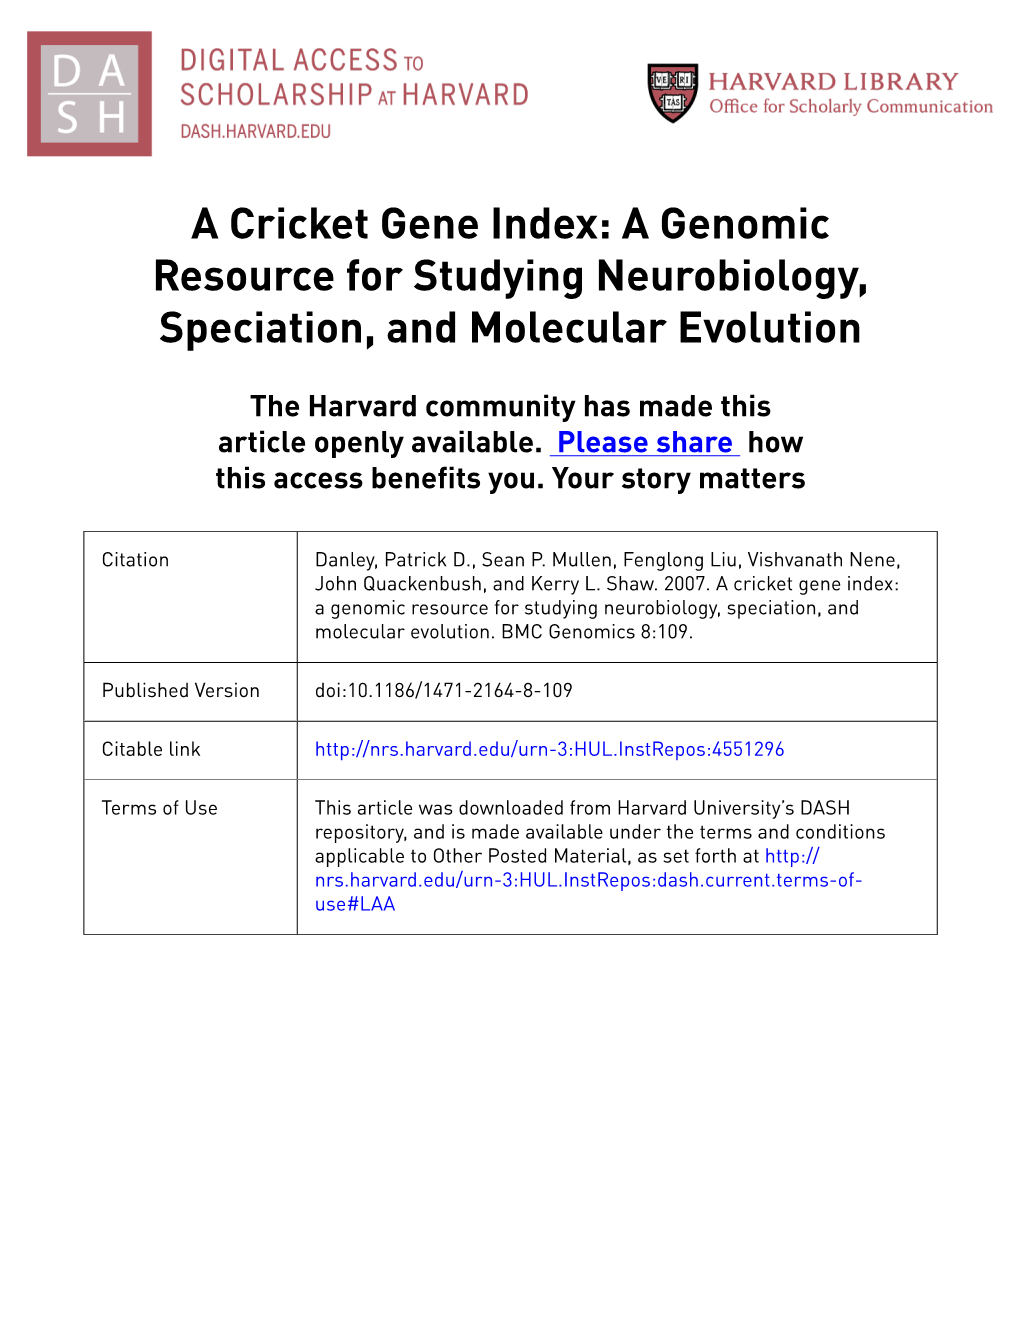 A Cricket Gene Index: a Genomic Resource for Studying Neurobiology, Speciation, and Molecular Evolution